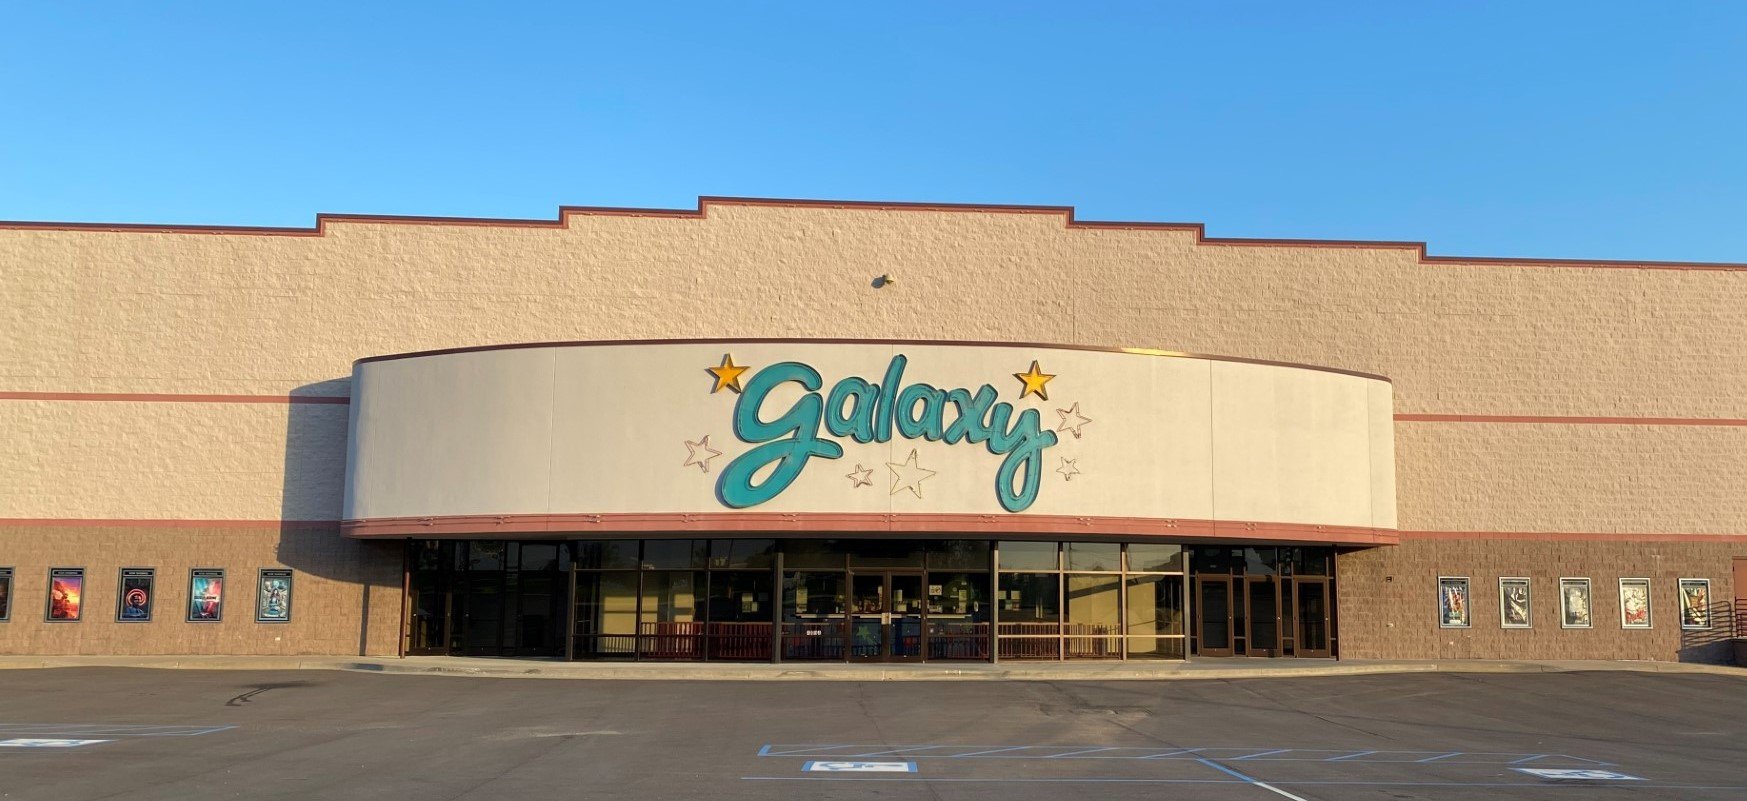 exterior of theatre showing galaxy sign